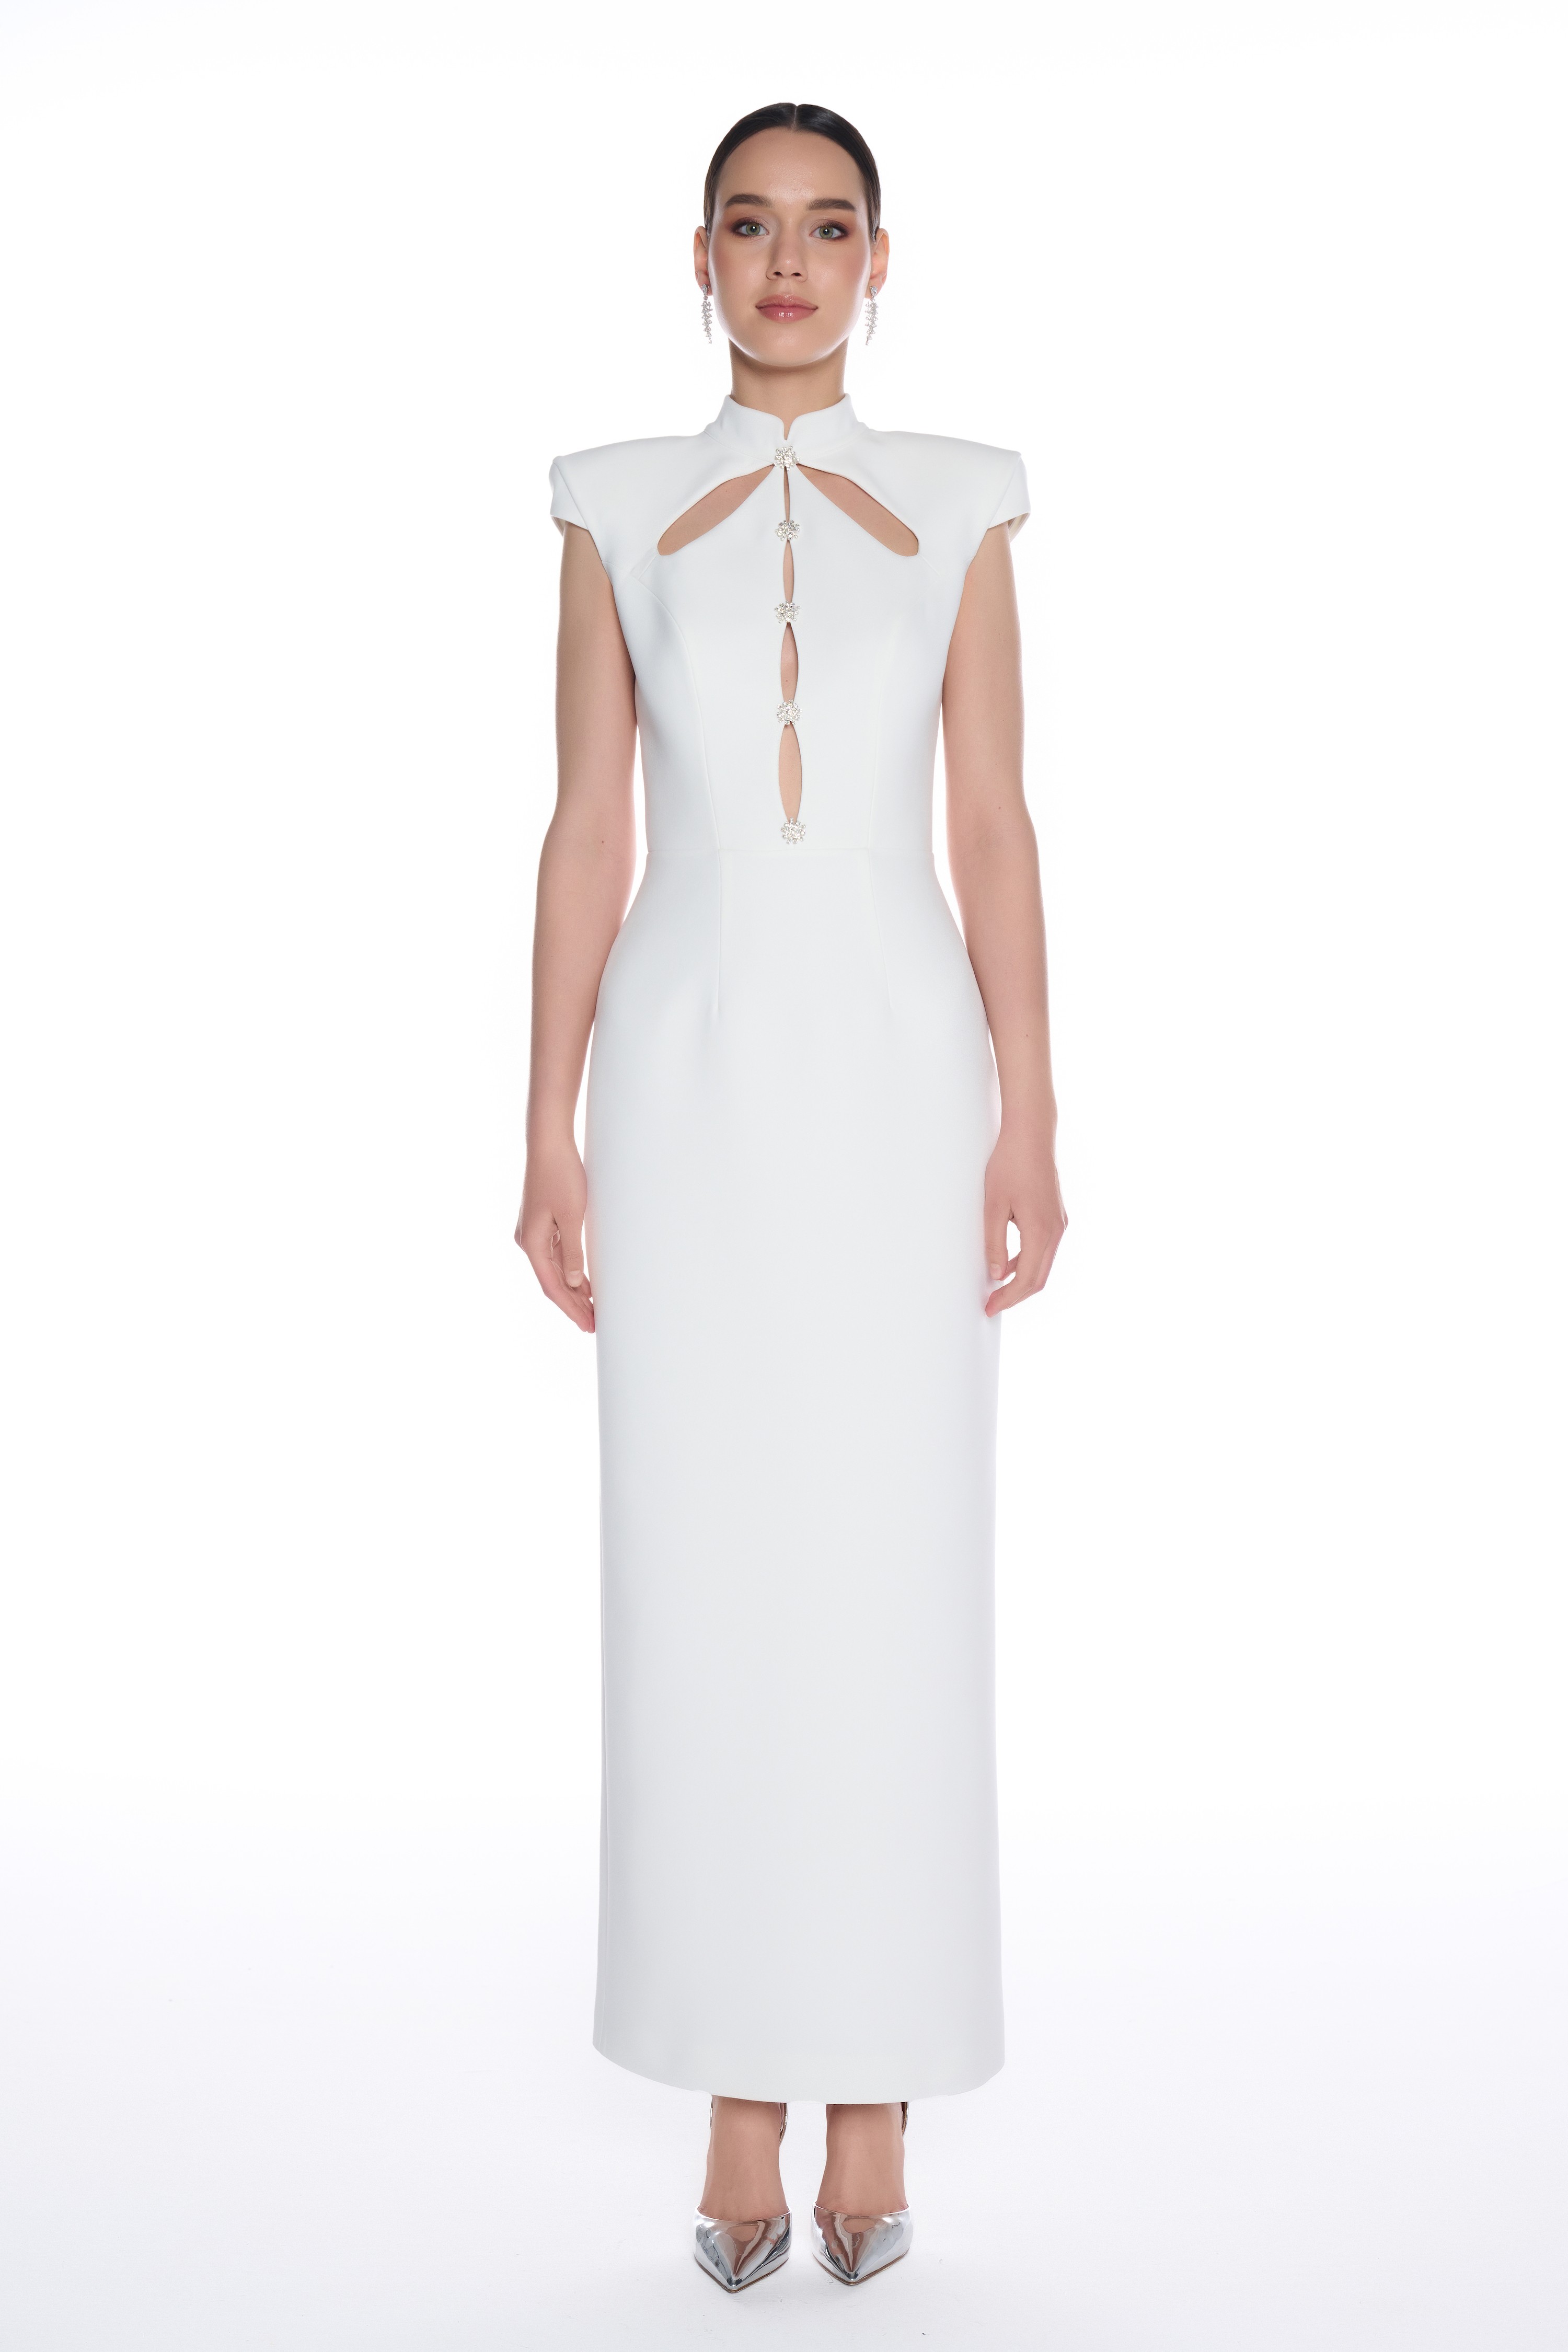 R05 - Shawl Collar, Padded Shoulders, Windowpane Neckline, Stone Hand-Embroidery Detail, Back Slit, Long Pencil Dress